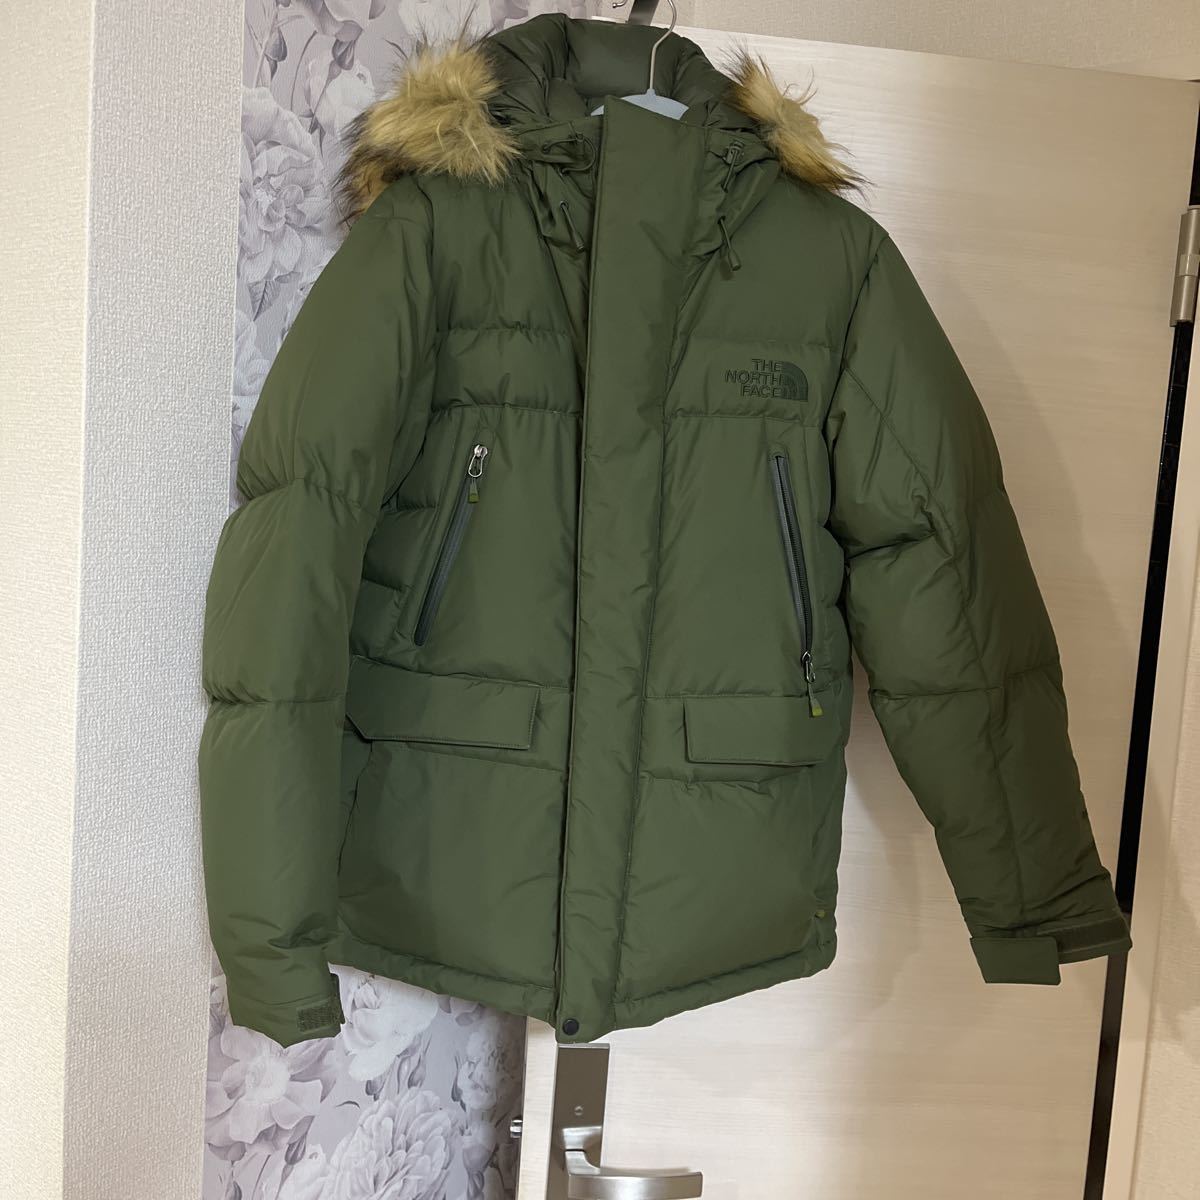 THE NORTH FACE 試着のみ！正規品